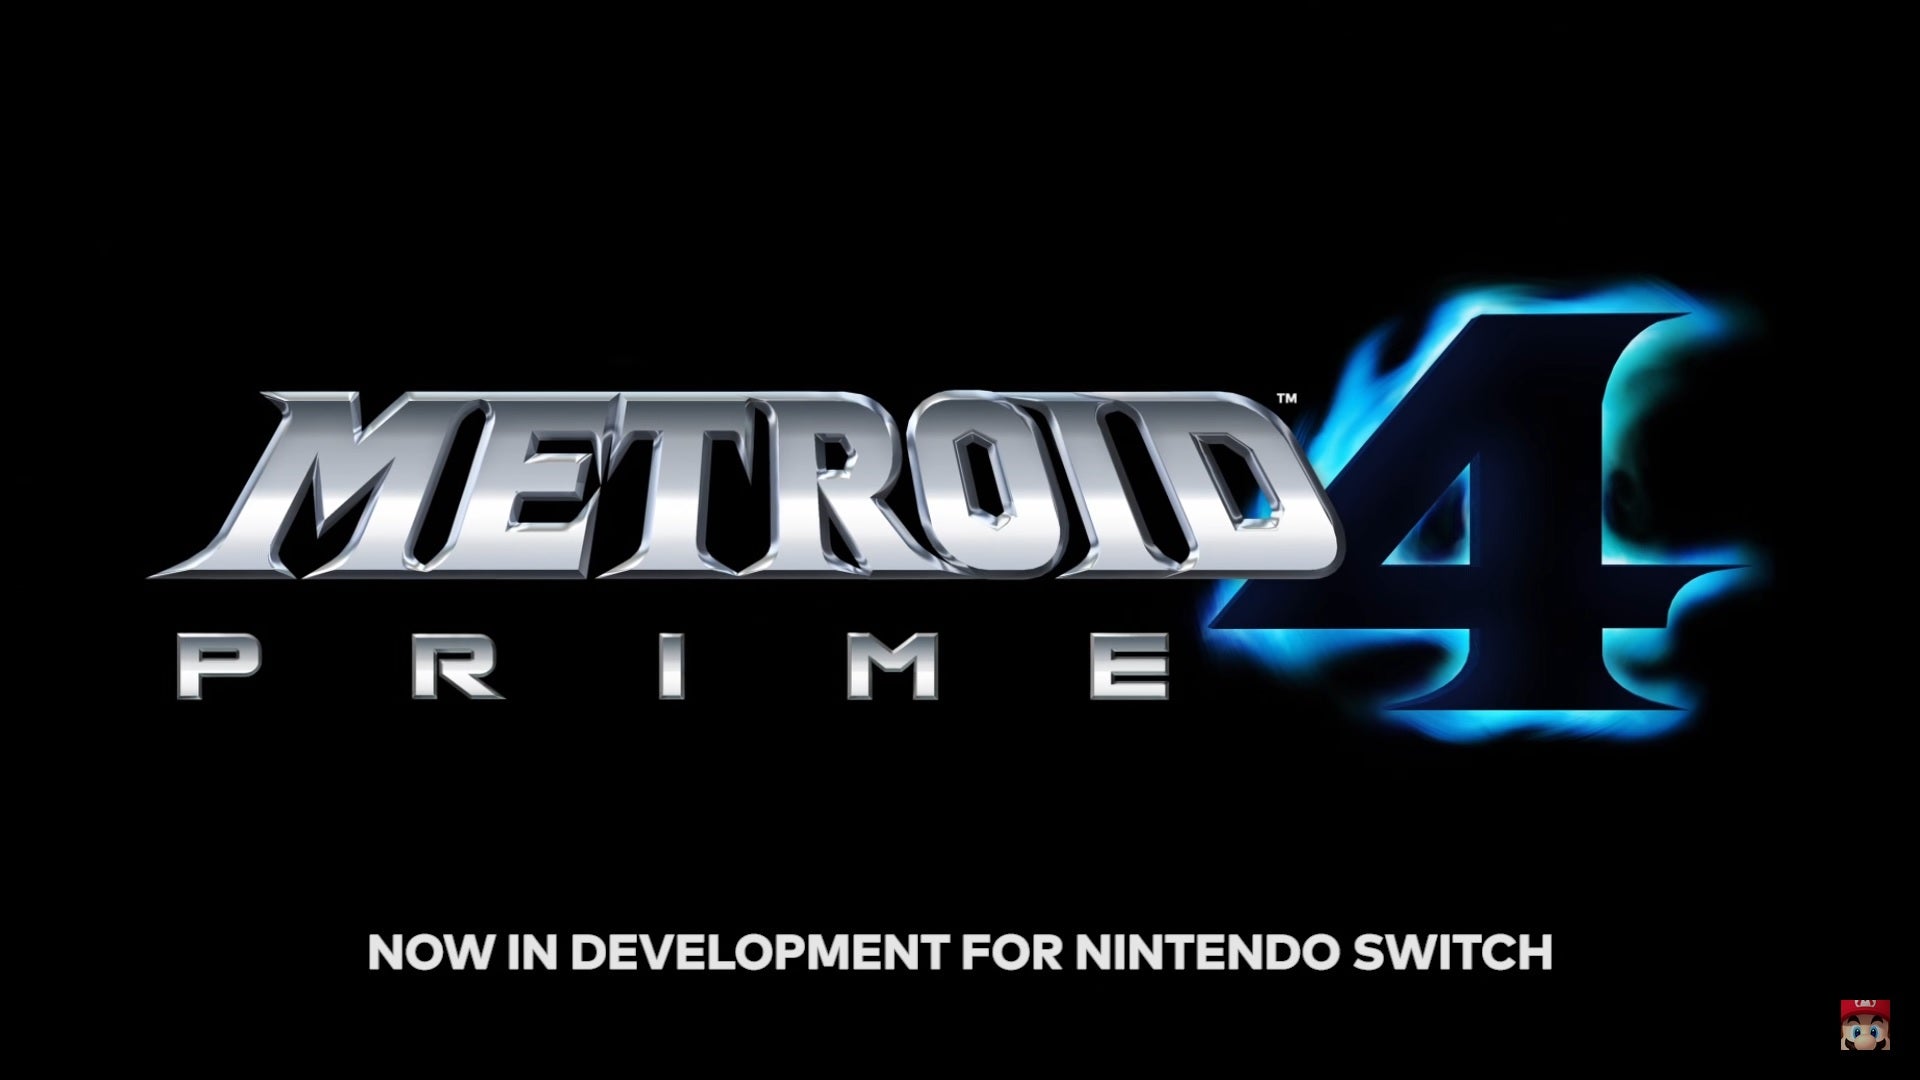 Image for Metroid Prime 4 development is currently underway for Nintendo Switch